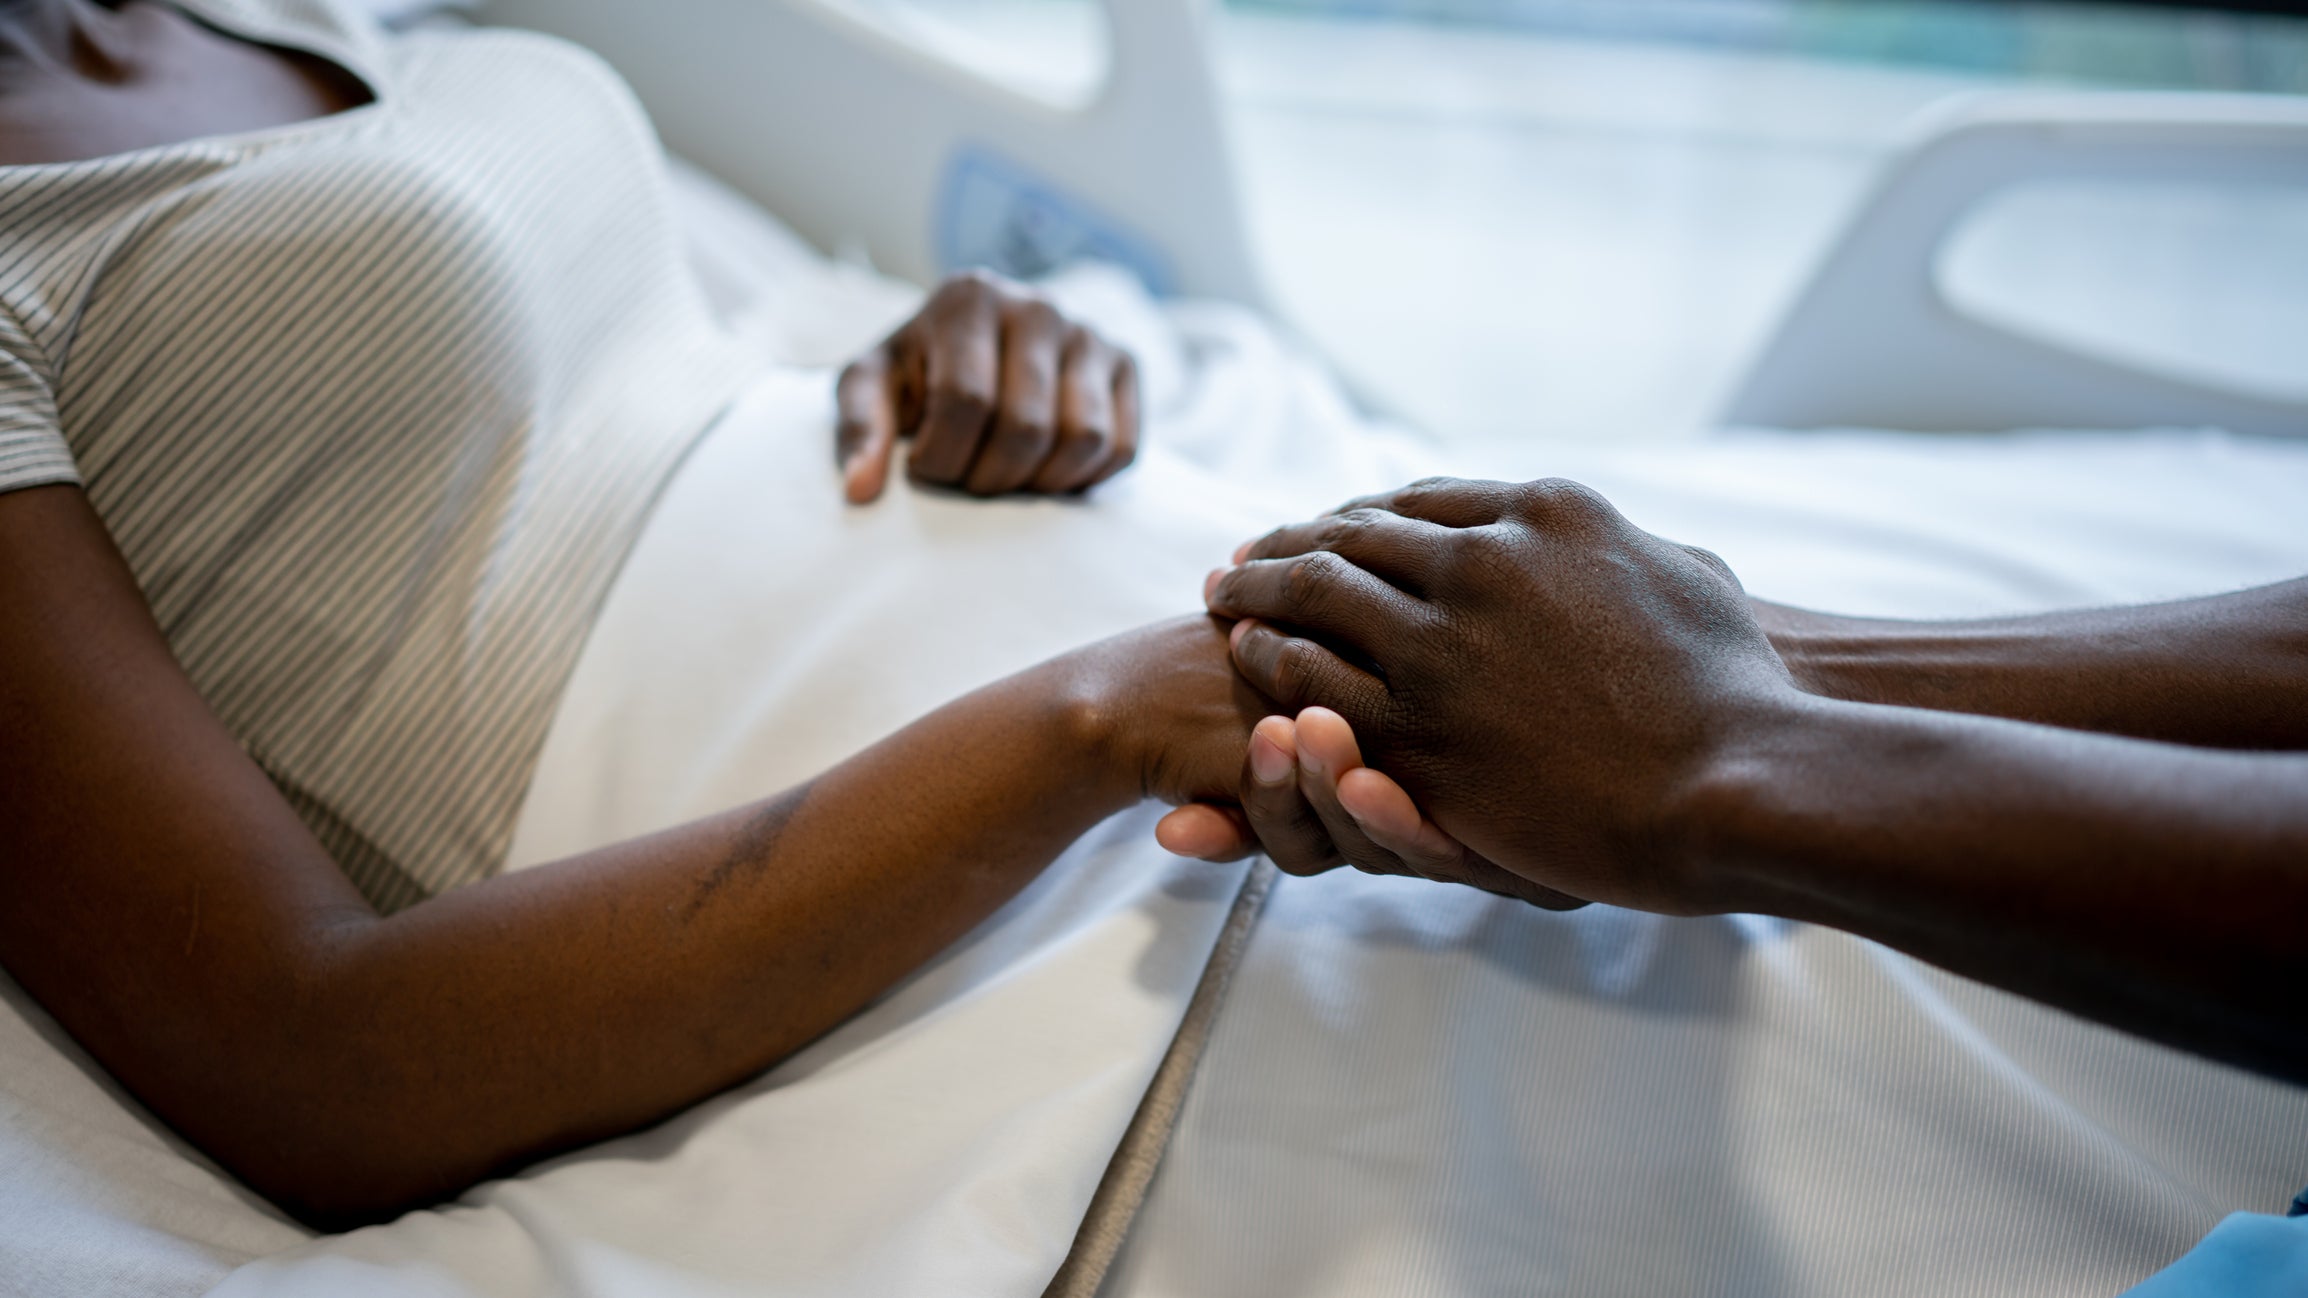 A landmark sickle cell disease inquiry has found evidence of racism in patient care